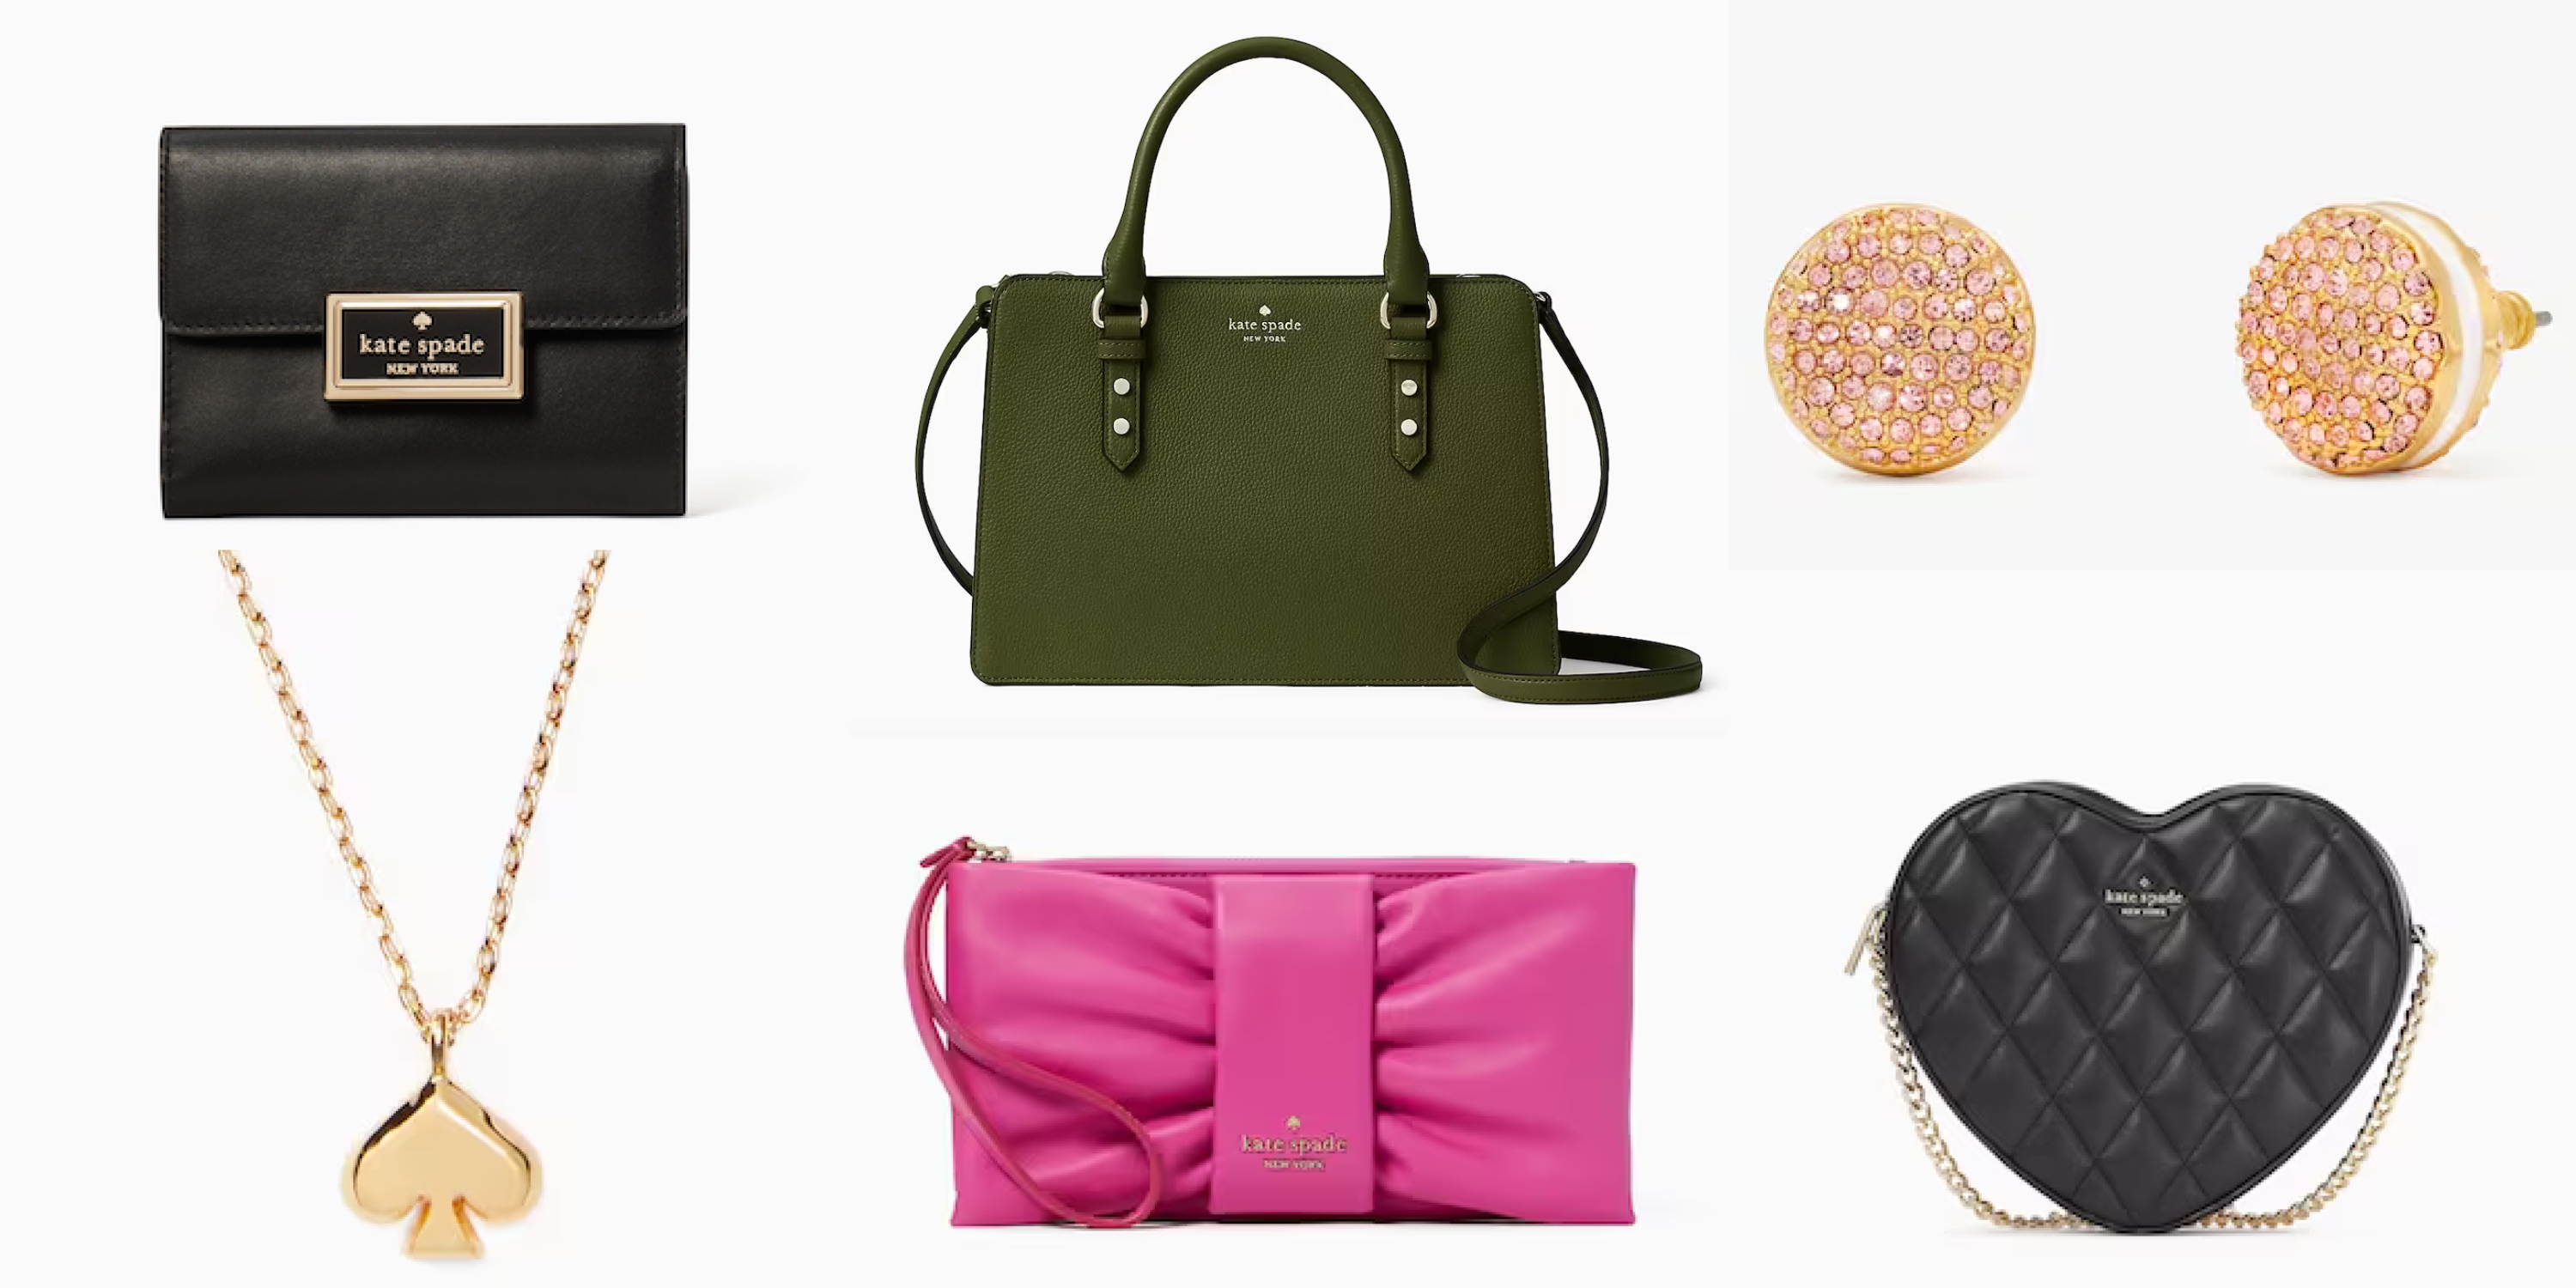 Kate Spade Surprise sale: Up to 70% off bags, wallets, accessories, more 